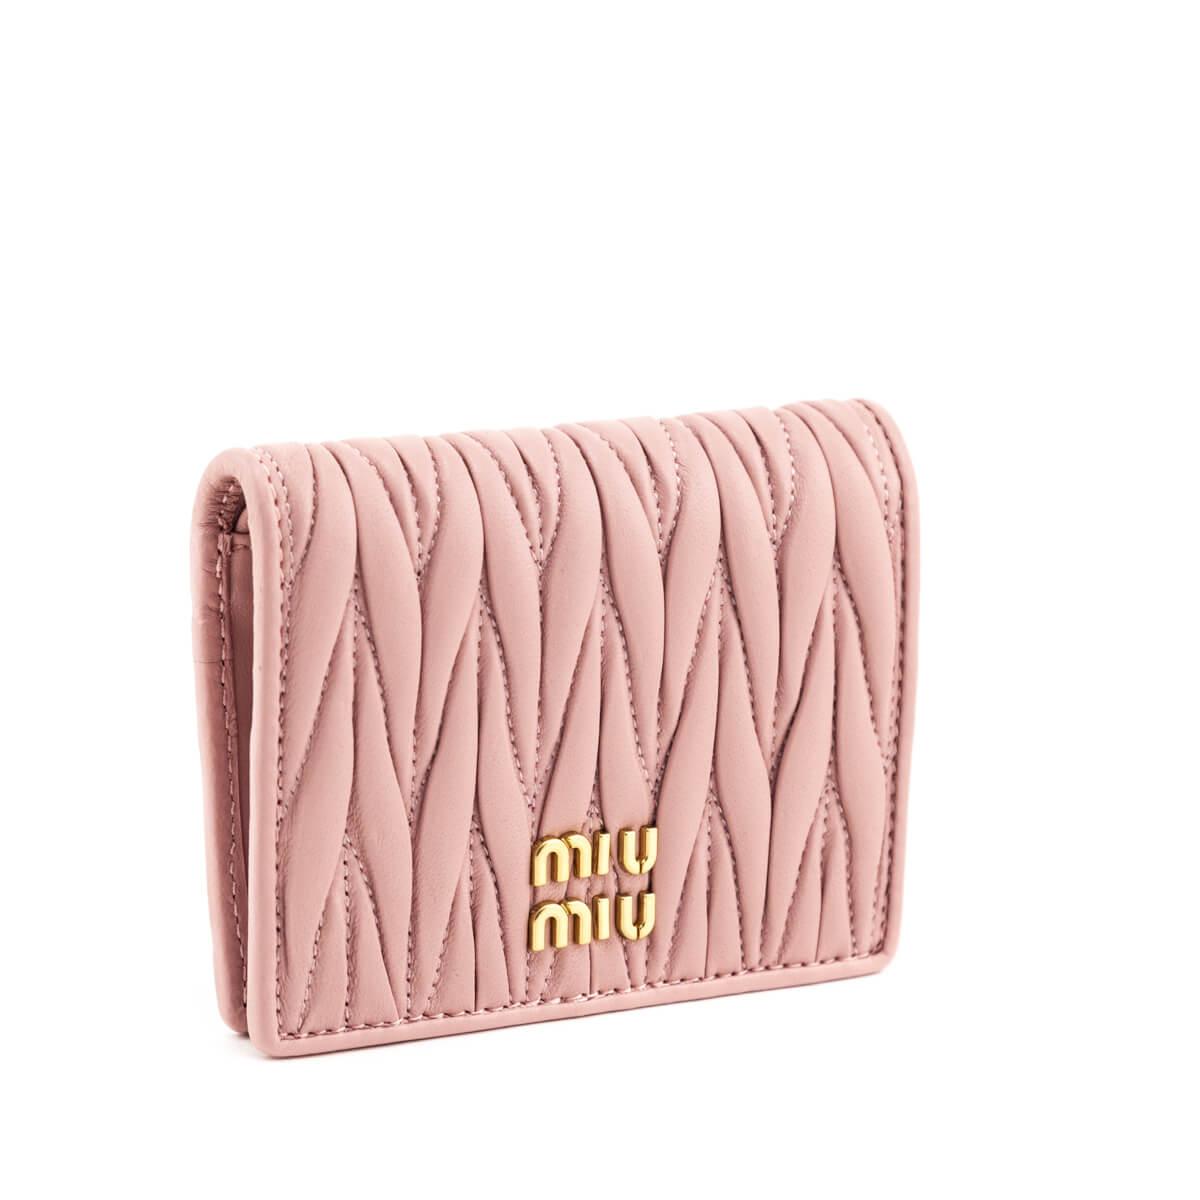 Miu Miu Pink Nappa Leather Matellasse Small Wallet - Love that Bag etc - Preowned Authentic Designer Handbags & Preloved Fashions